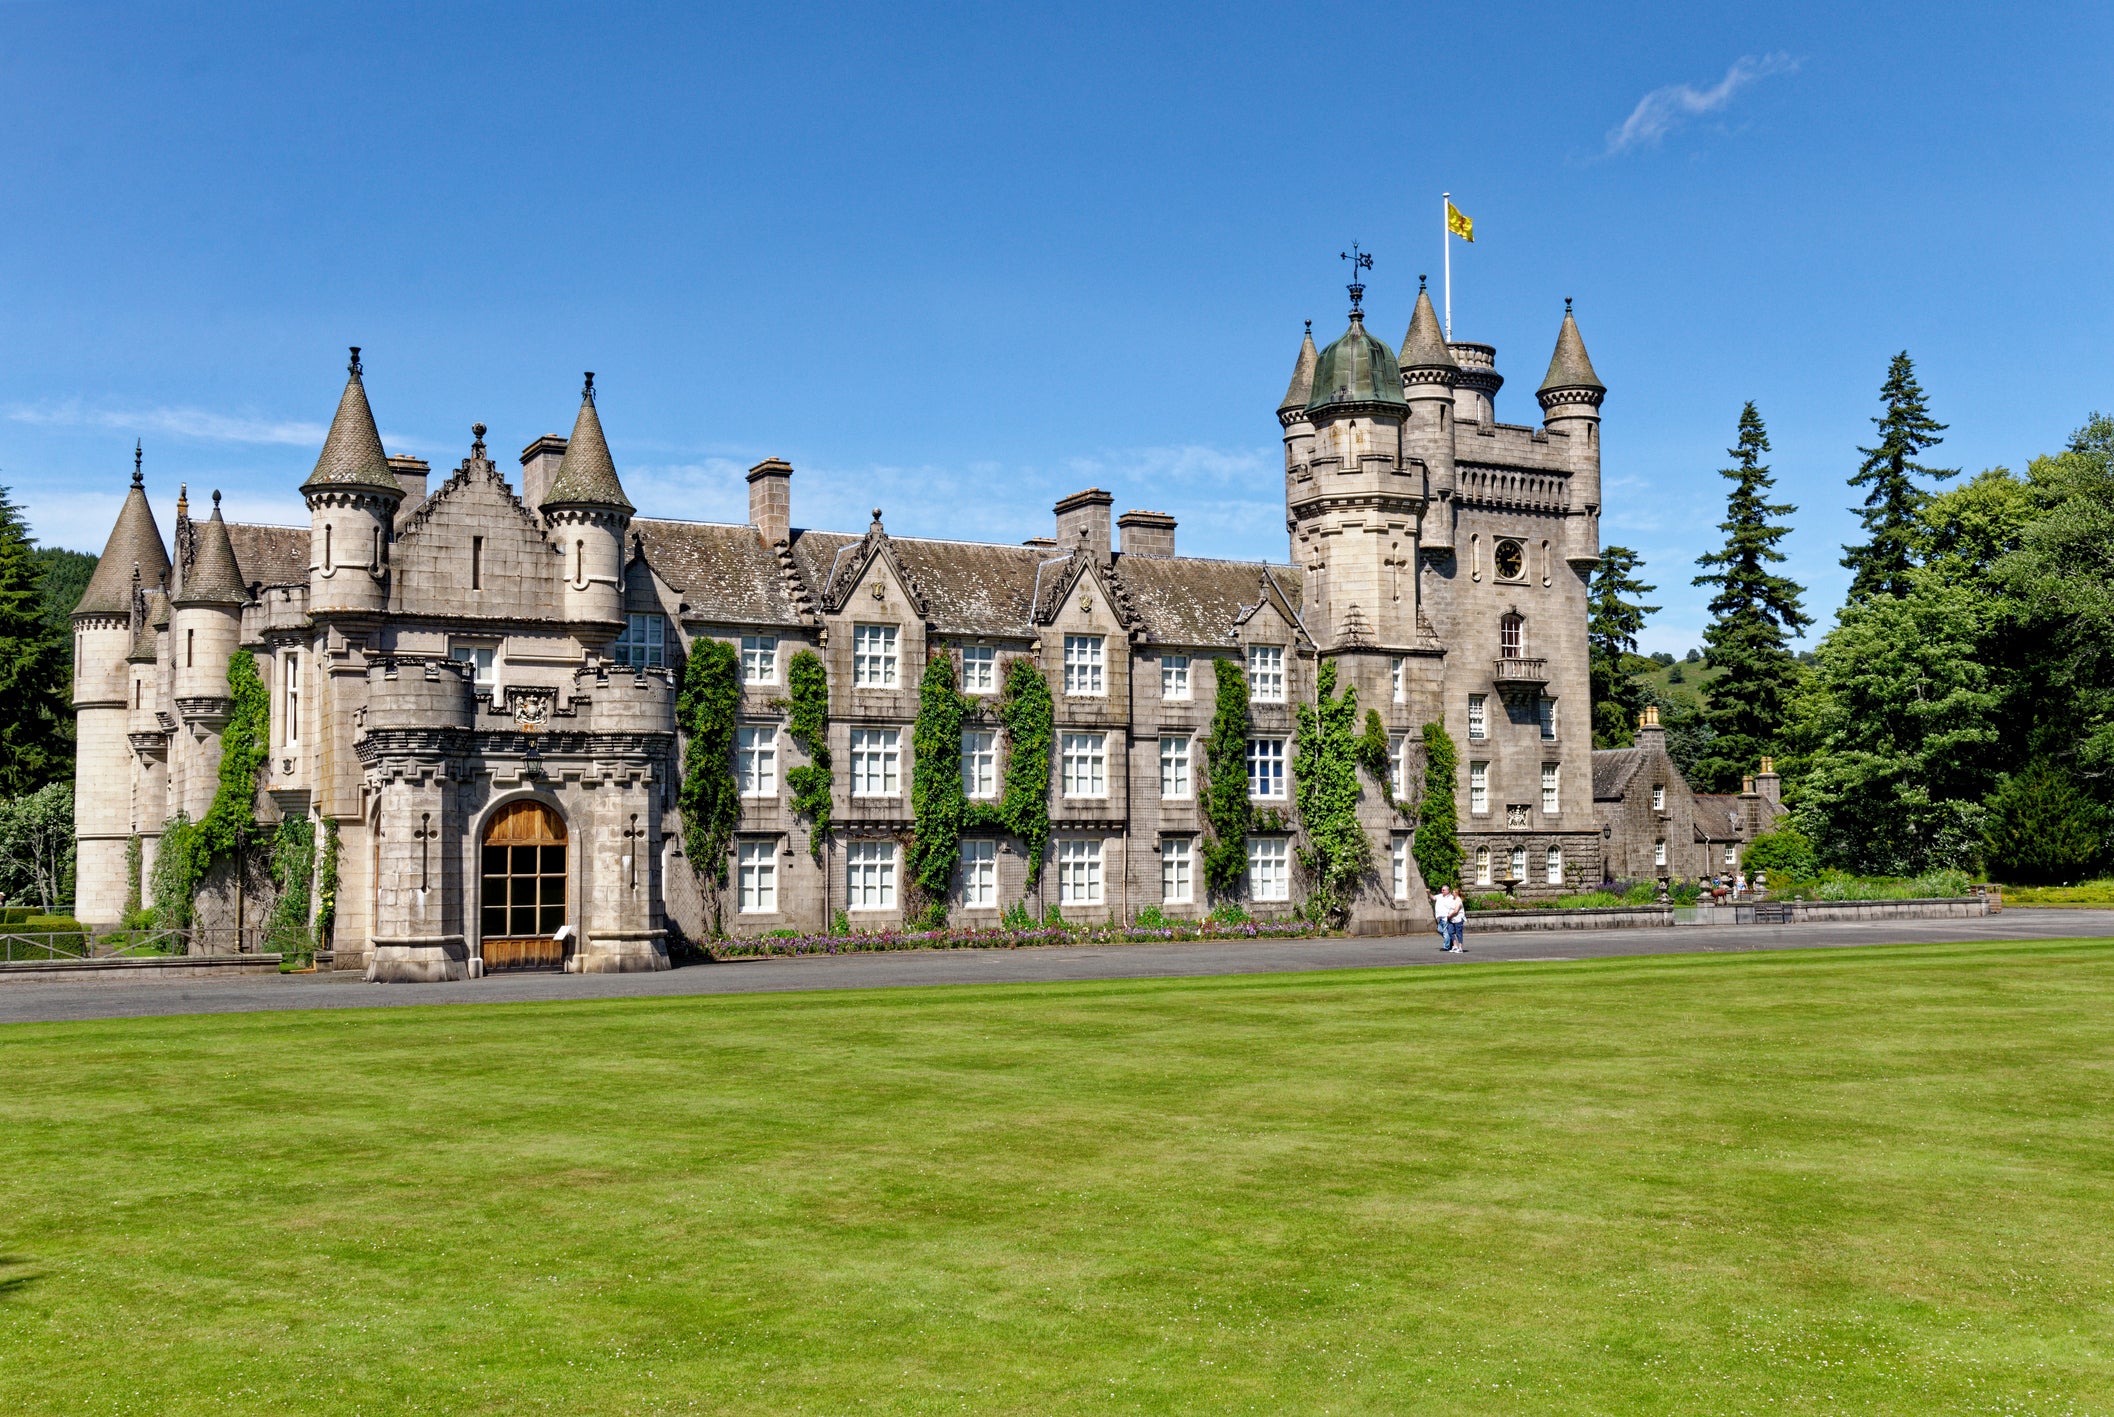 Balmoral Castle was purchased by Queen Victoria and Prince Albert in 1852